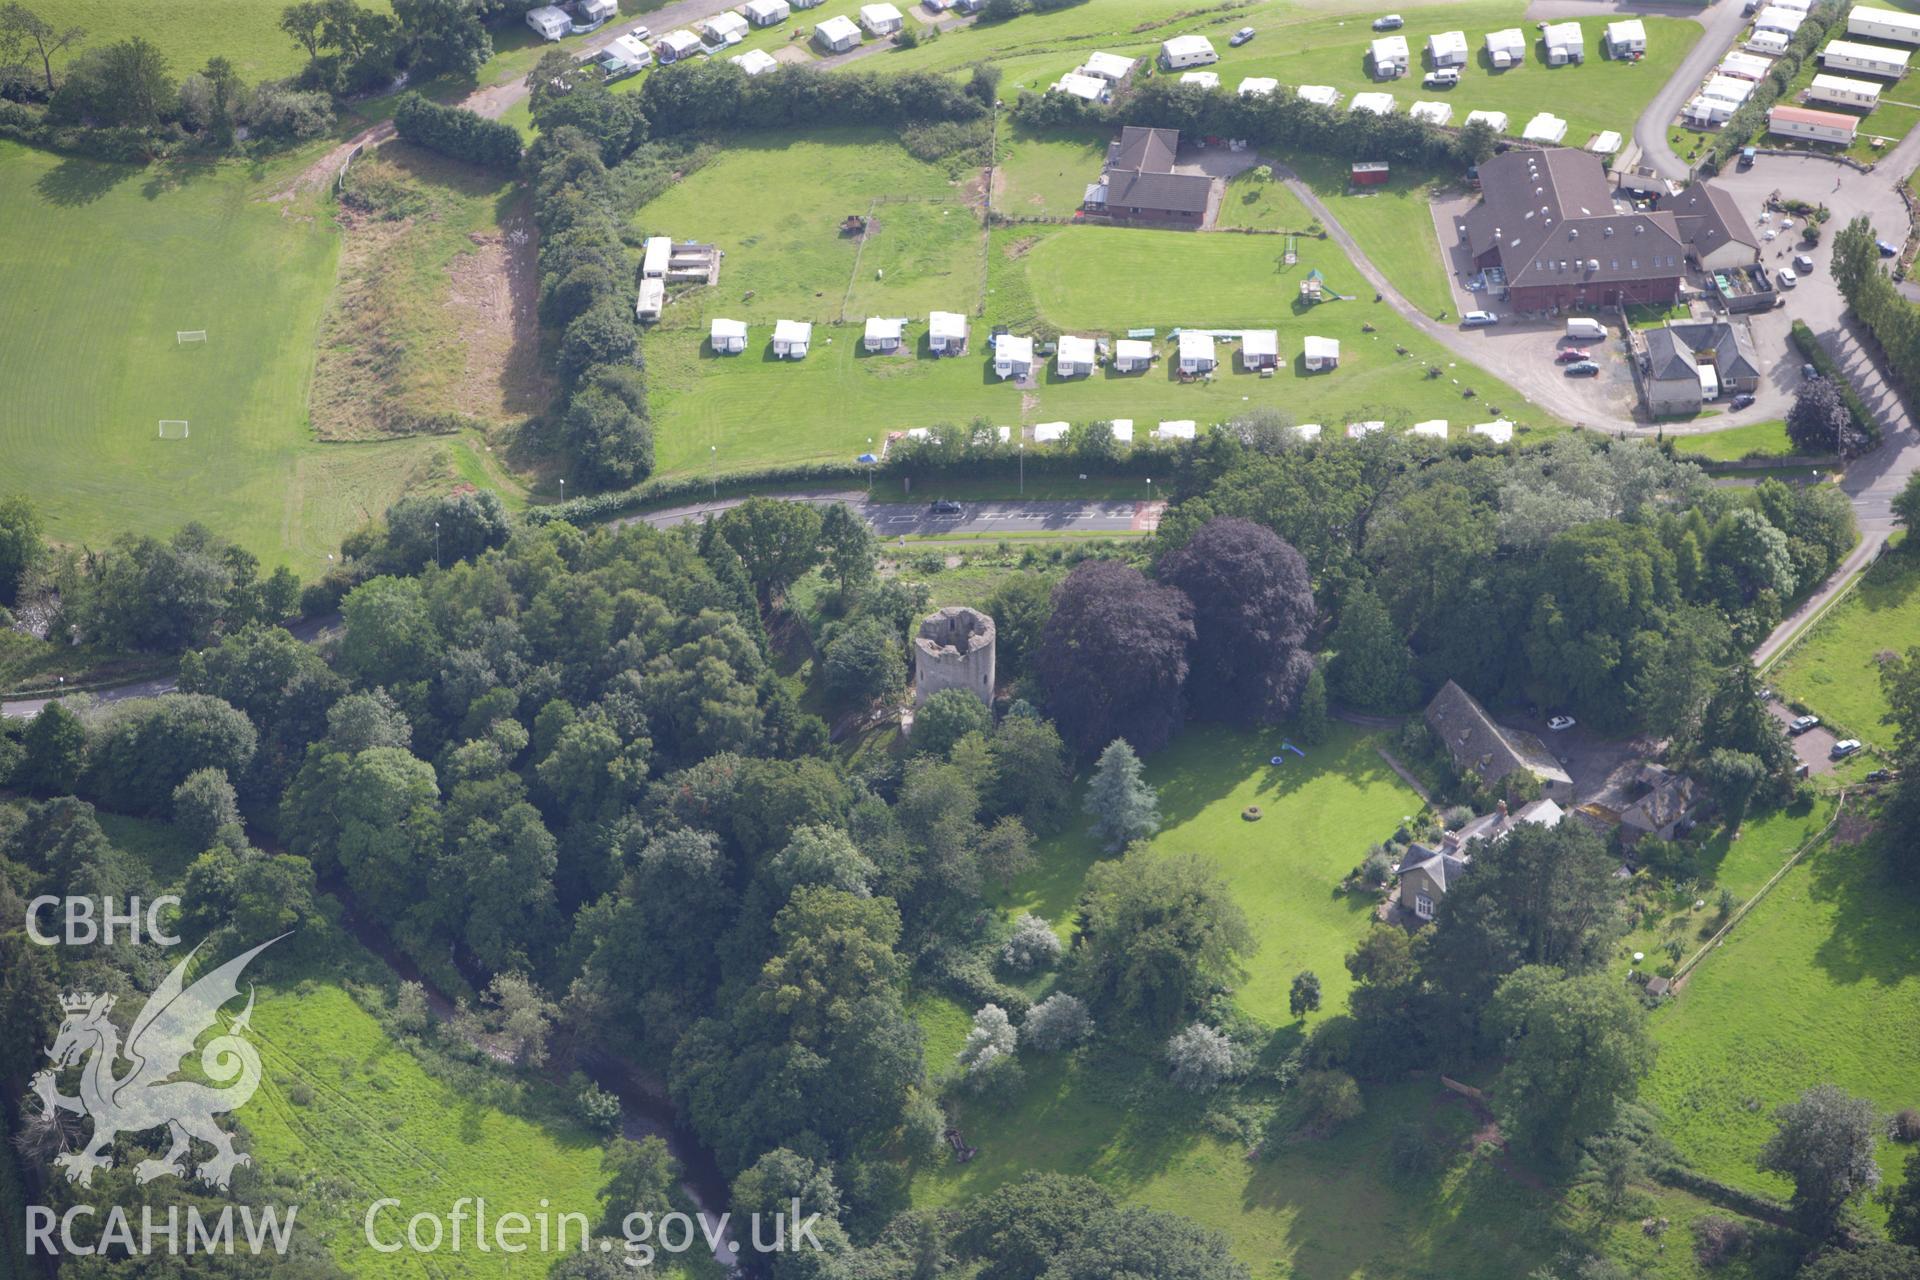 RCAHMW colour oblique aerial photograph of Bronllys Castle. Taken on 23 July 2009 by Toby Driver